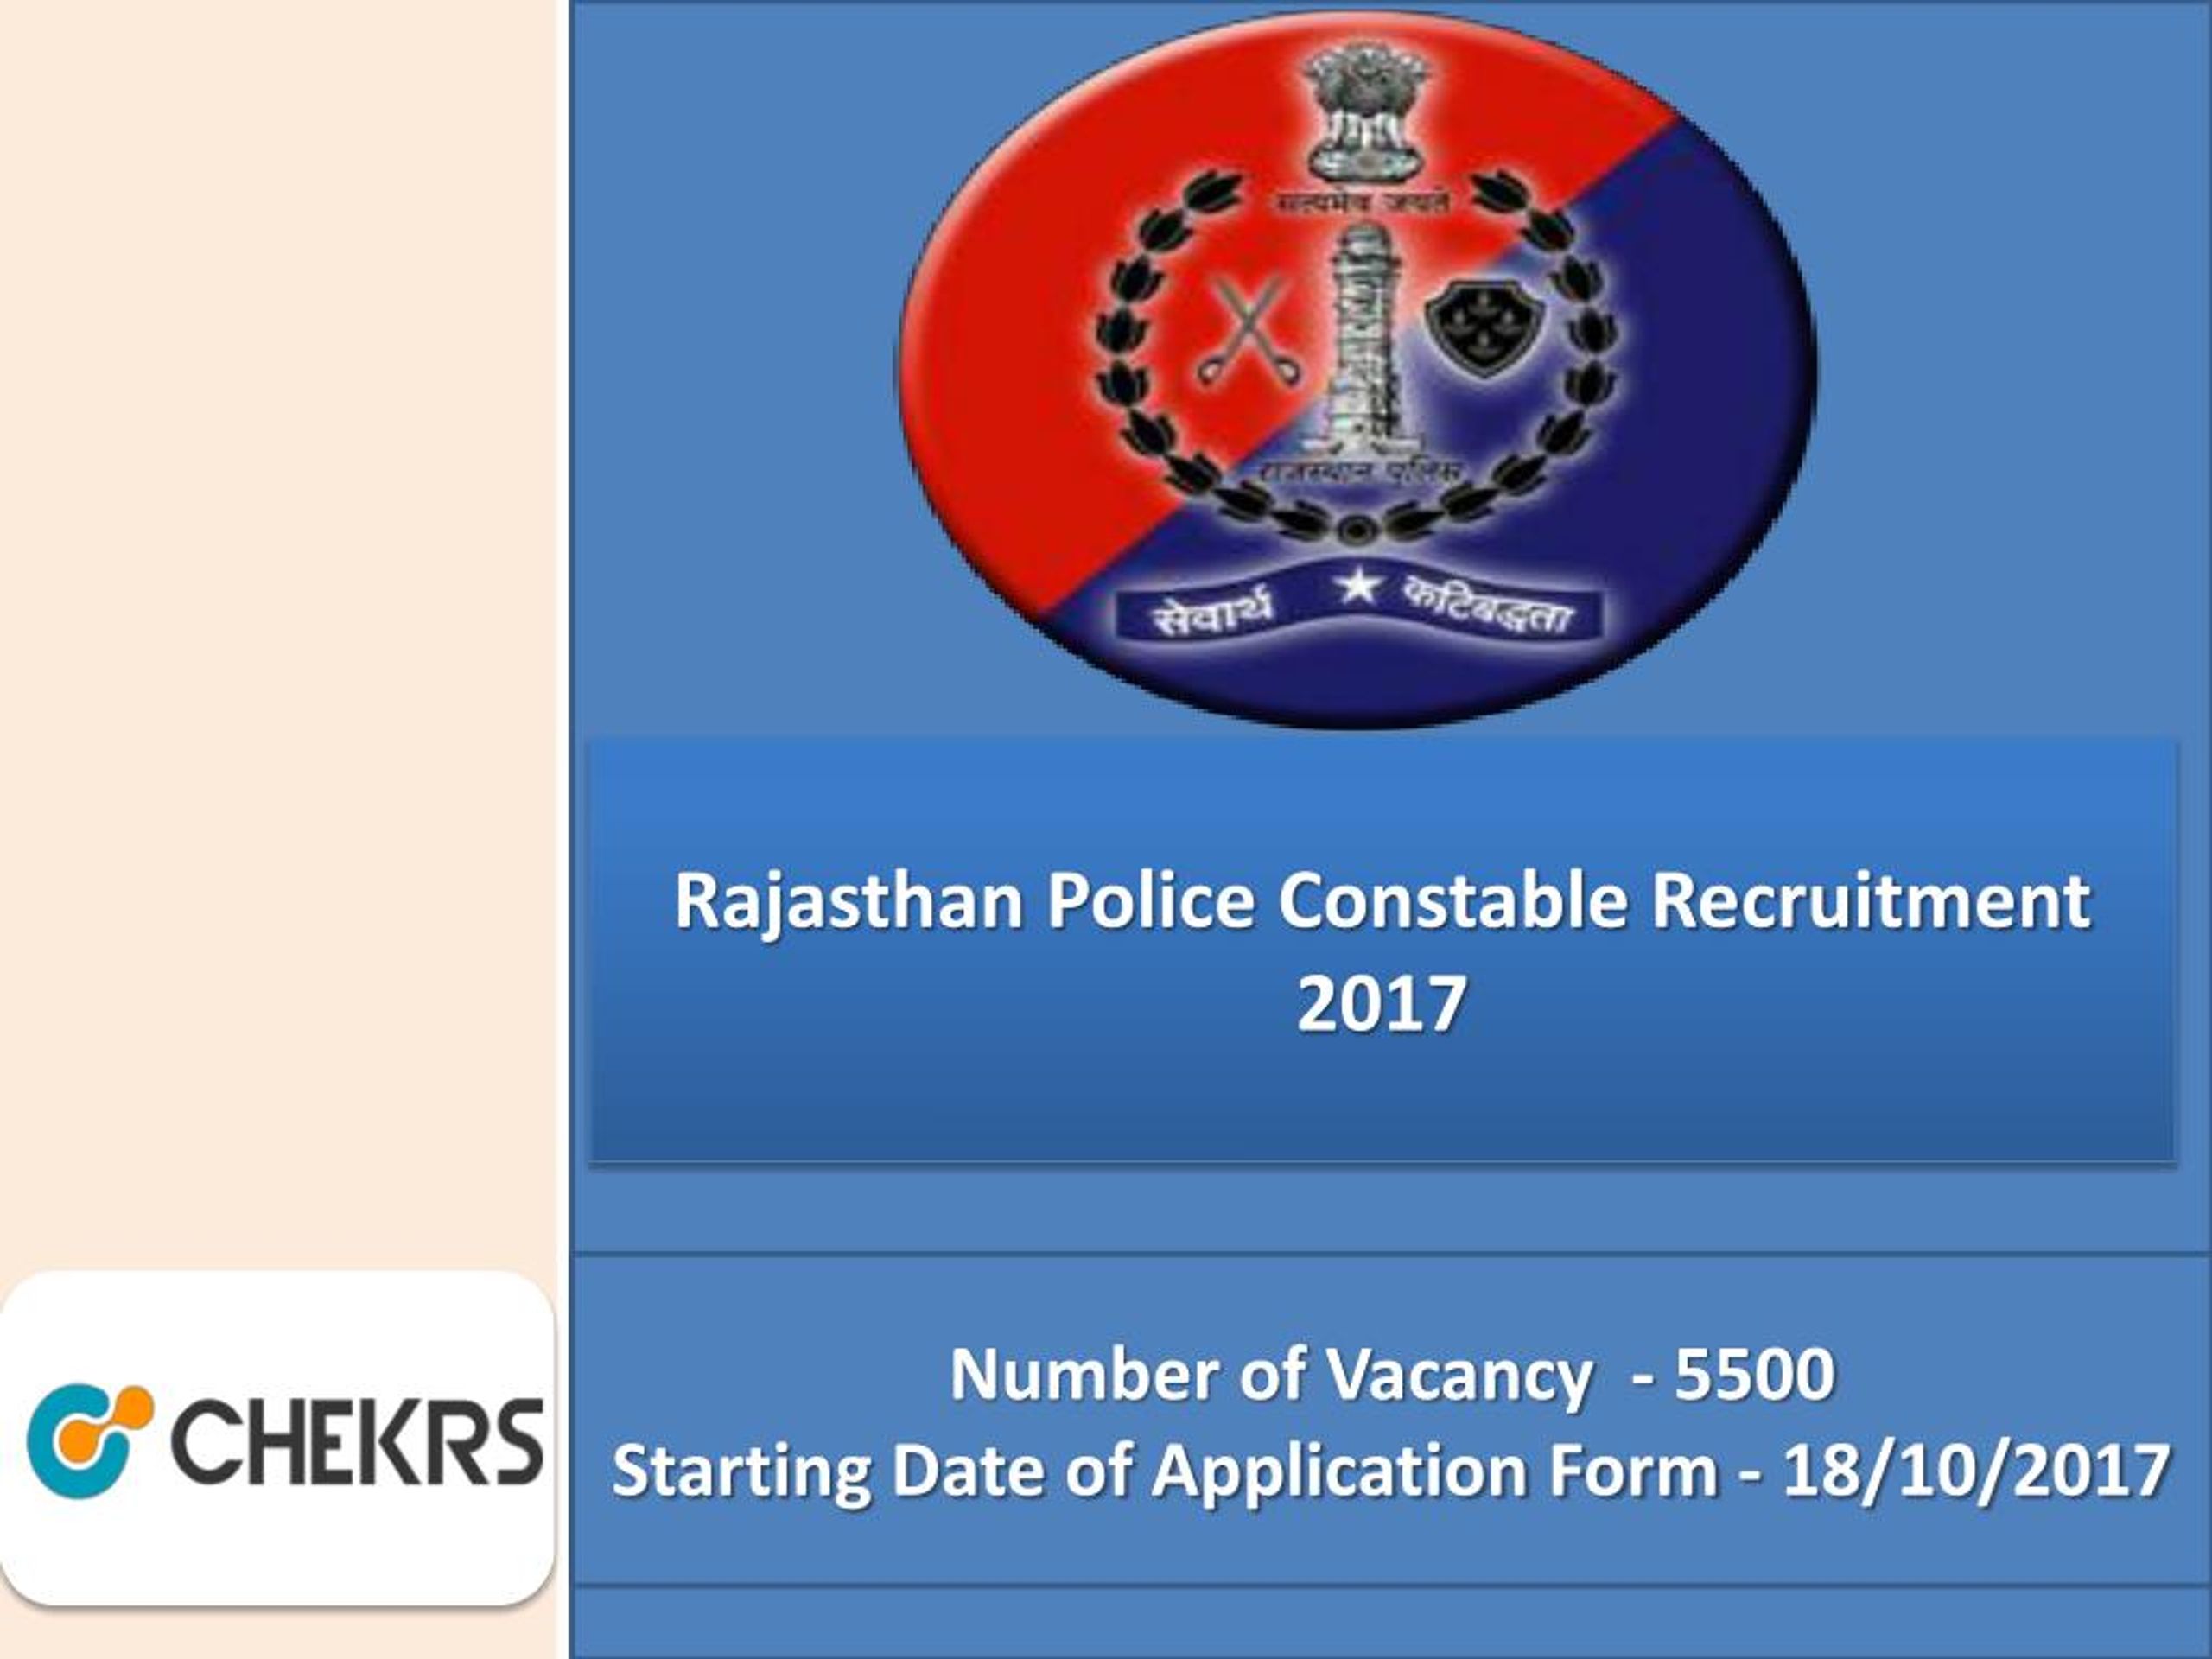 Rajasthan Police Apps on the App Store